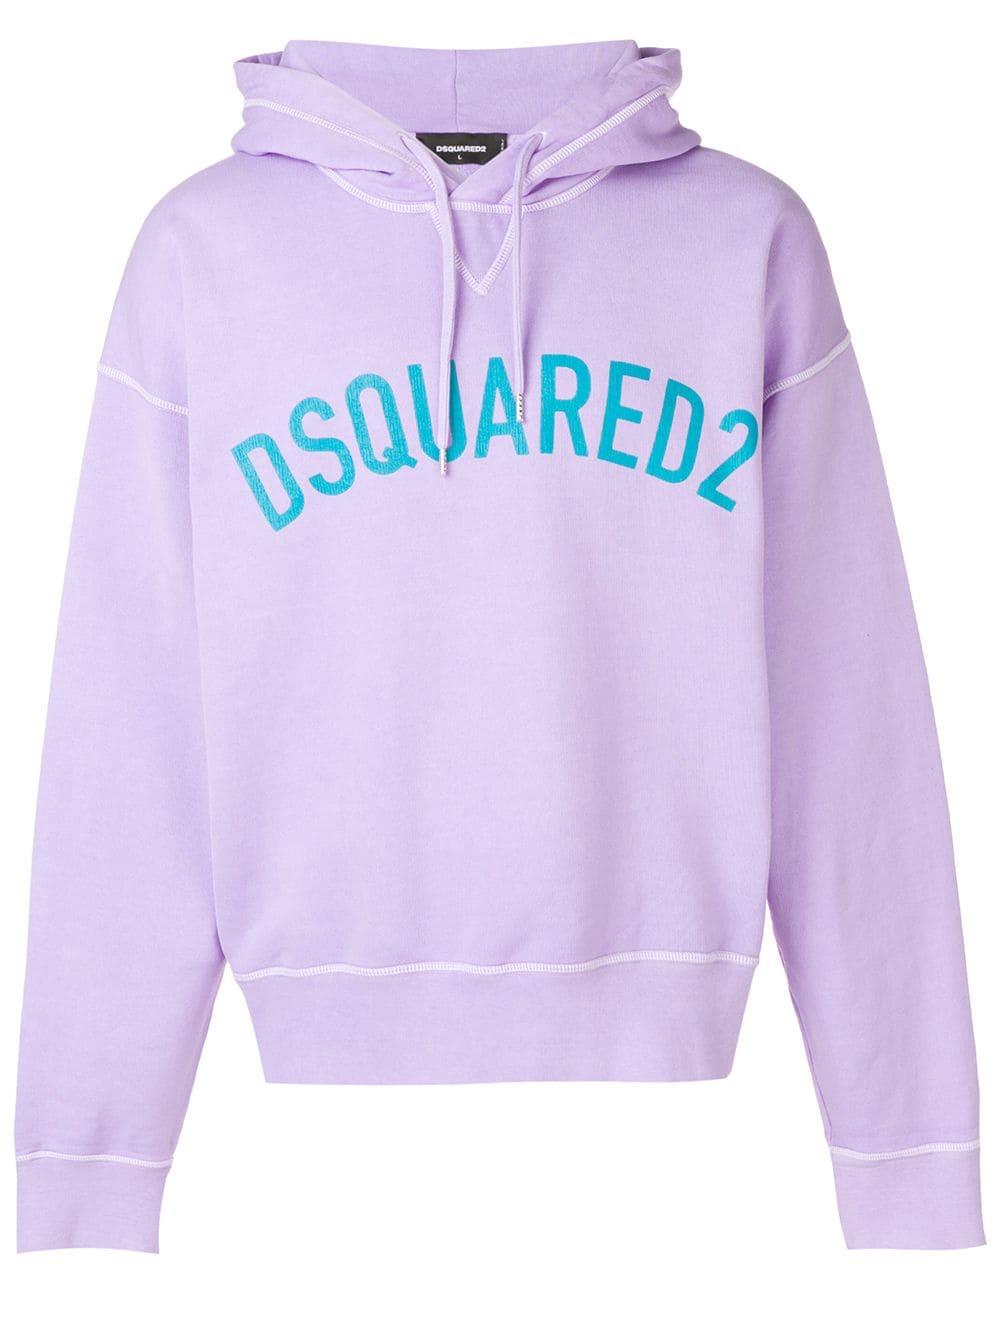 DSquared² Cotton Logo Hoodie in Lilac (Purple) for Men - Lyst